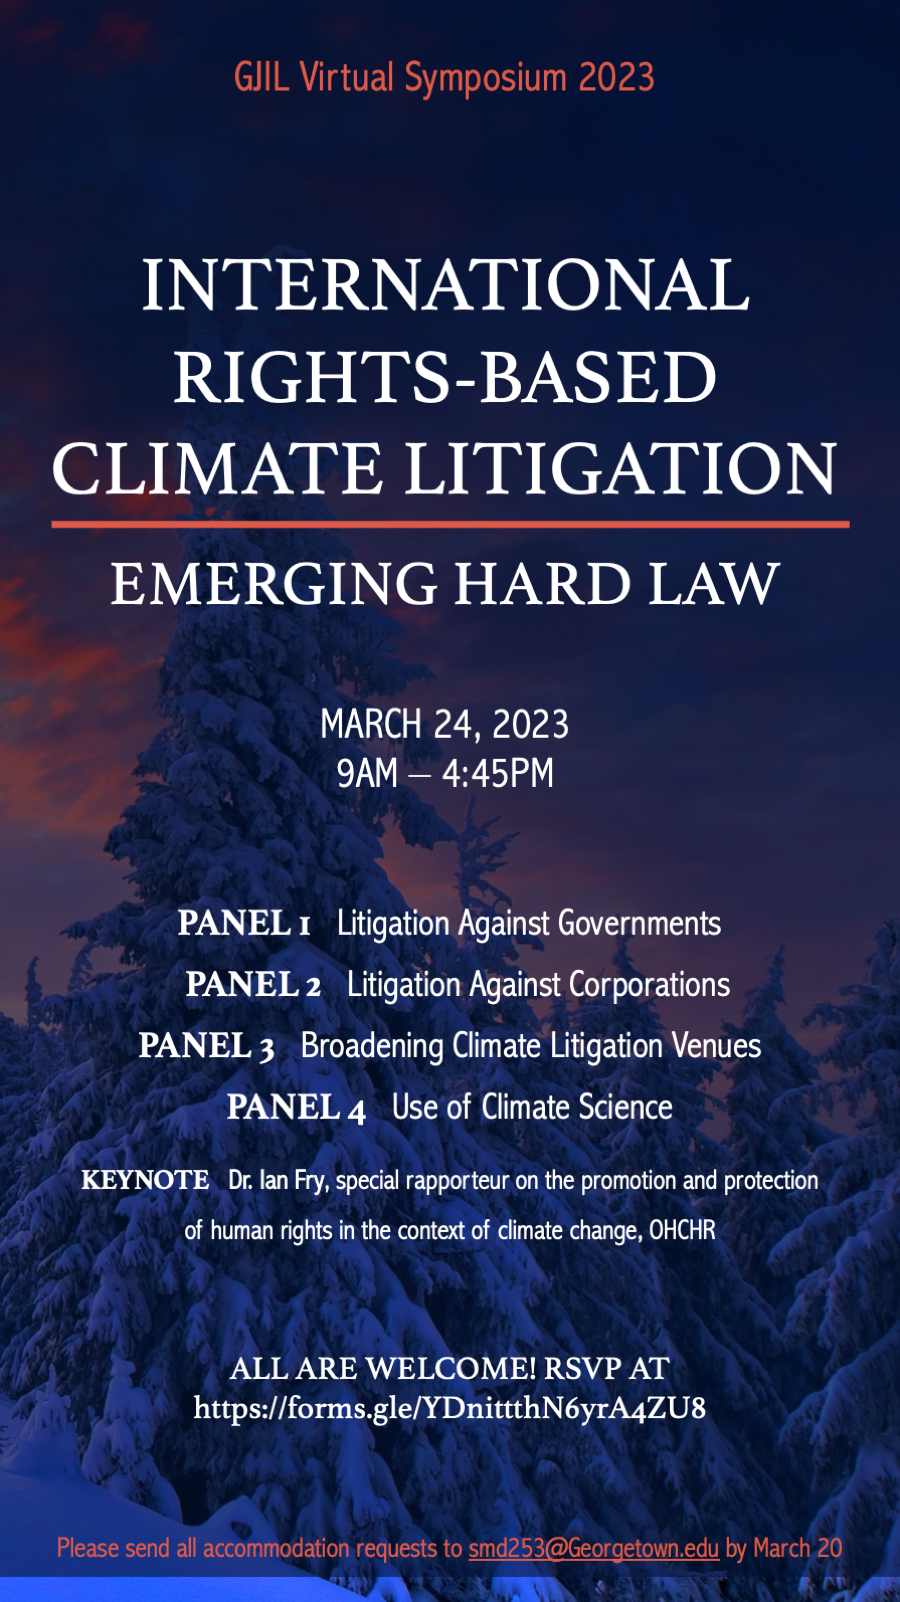 March 24, 2023 9am-4:45pm Panel 1: Litigation Against Governments Panel 2: Litigation Against Corporations Panel 3: Broadening Climate Litigation Venues Panel 4: Use of Climate Science Keynote: Dr Ian Fry, special rapporteur on the promotion and protection of human rights in the context of climate change, OHCHR